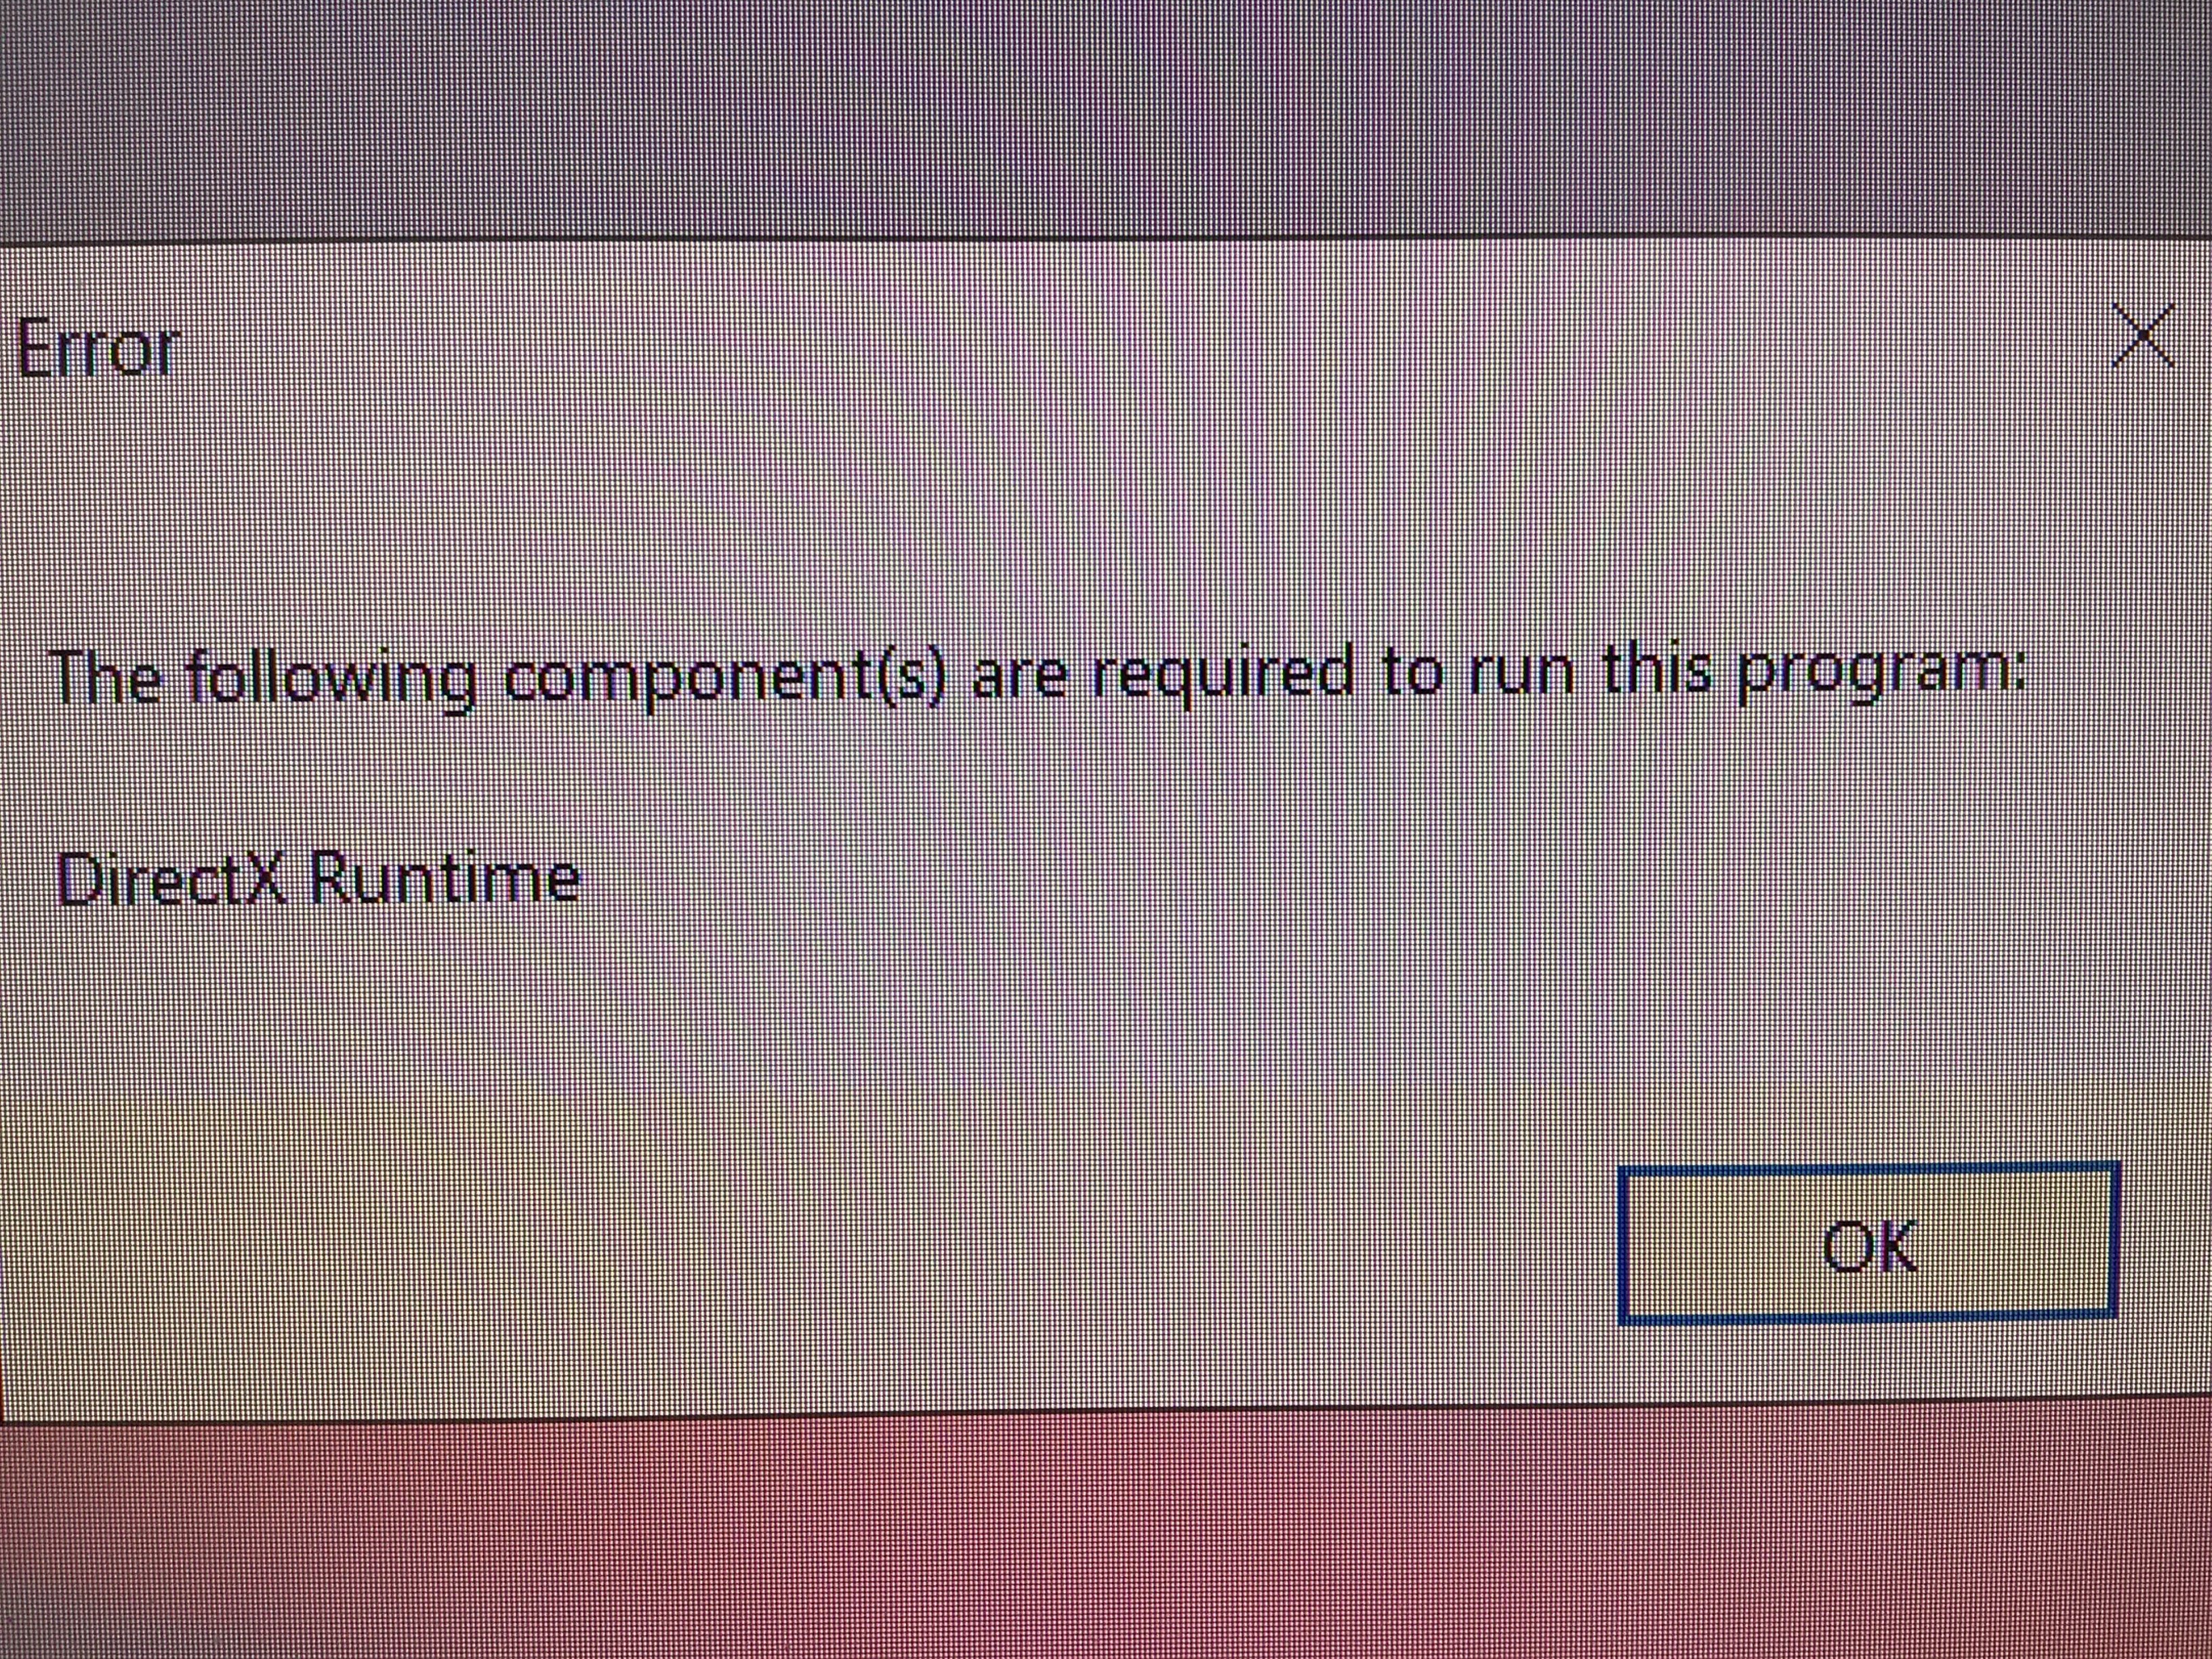 Can someone tell me how to fix this? I've tried to install